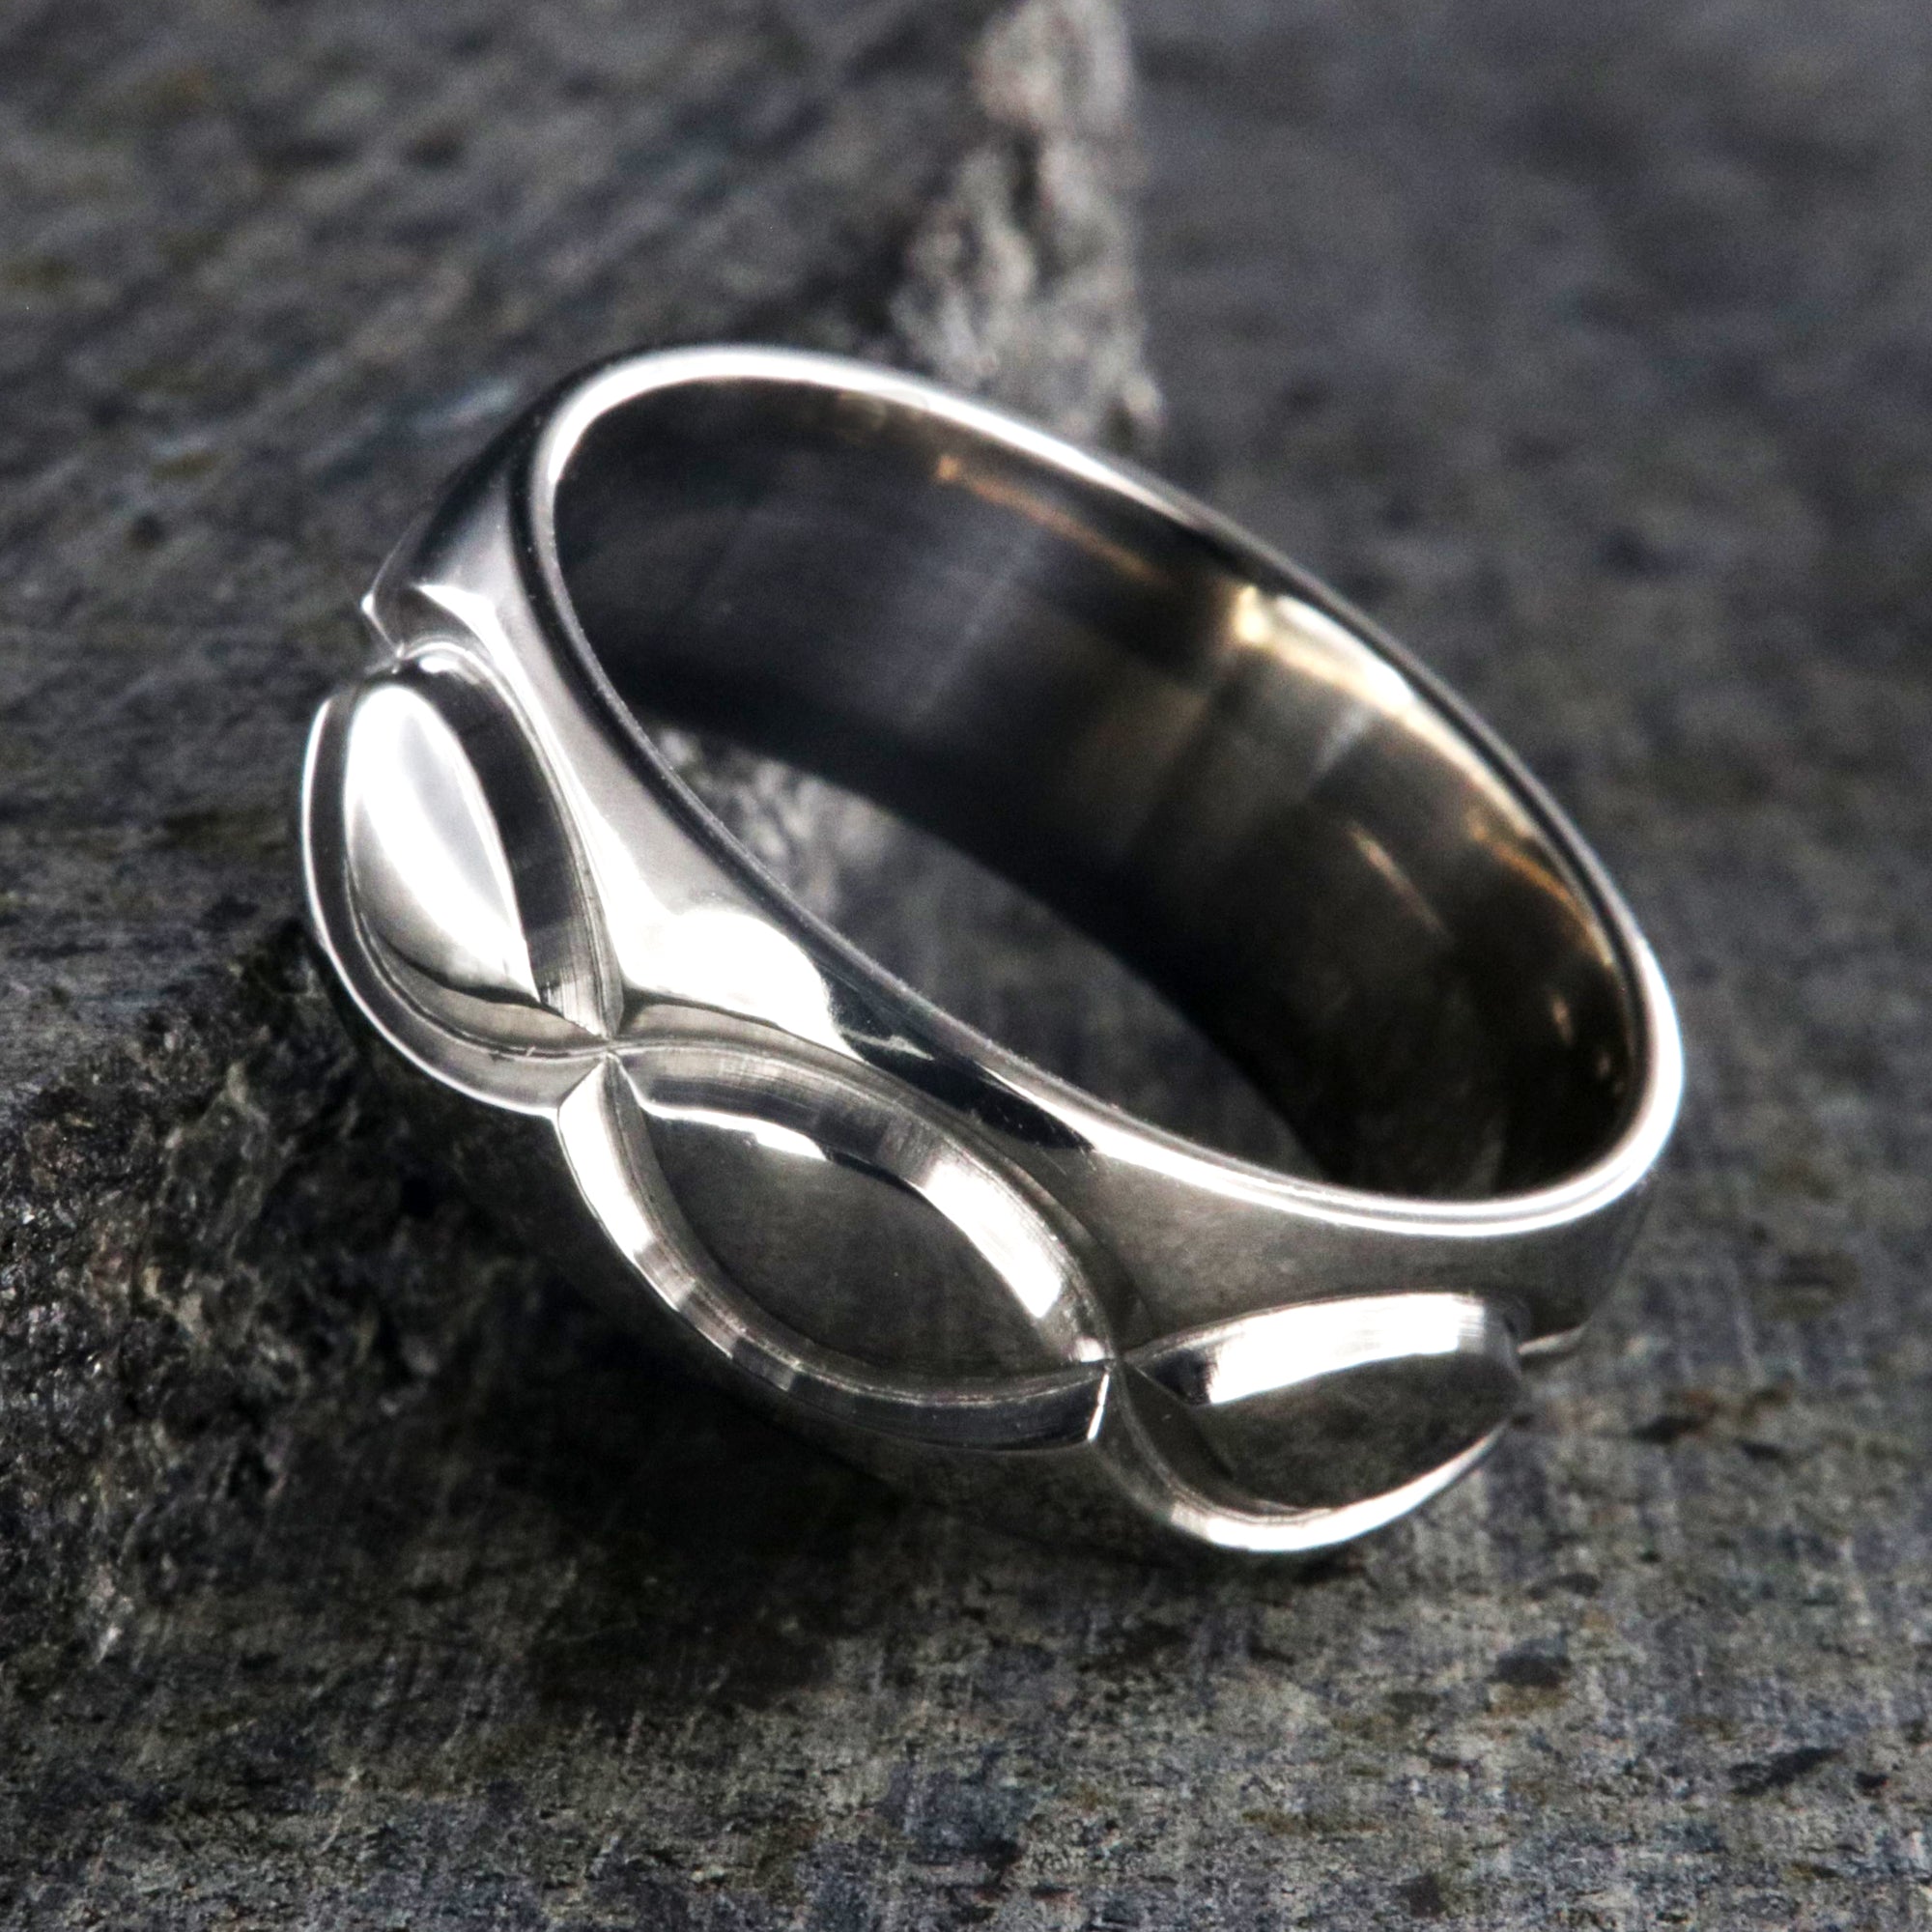 8mm wide titanium wedding band with a milled infinity design and rounded profile